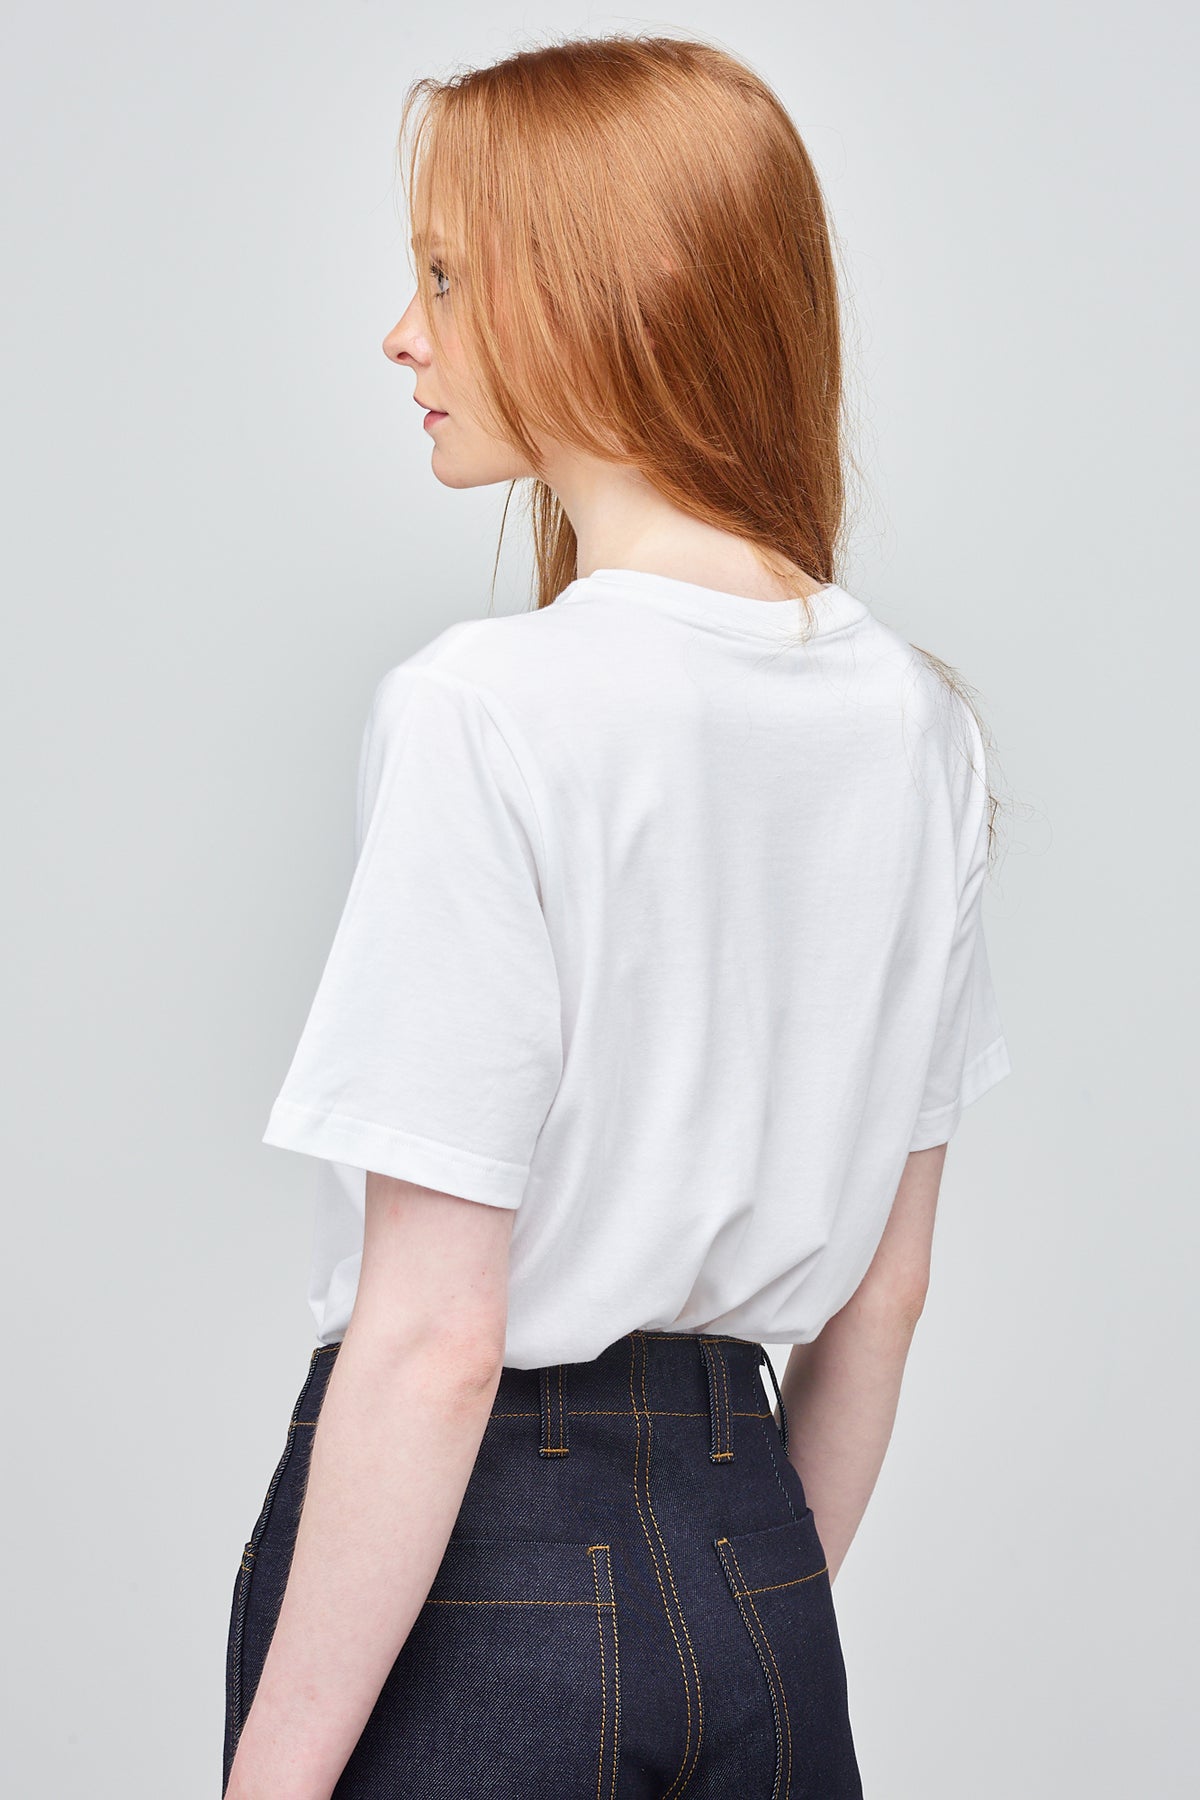 
            Thigh up of female from the back with ginger hair wearing white t shirt paired with indigo jean